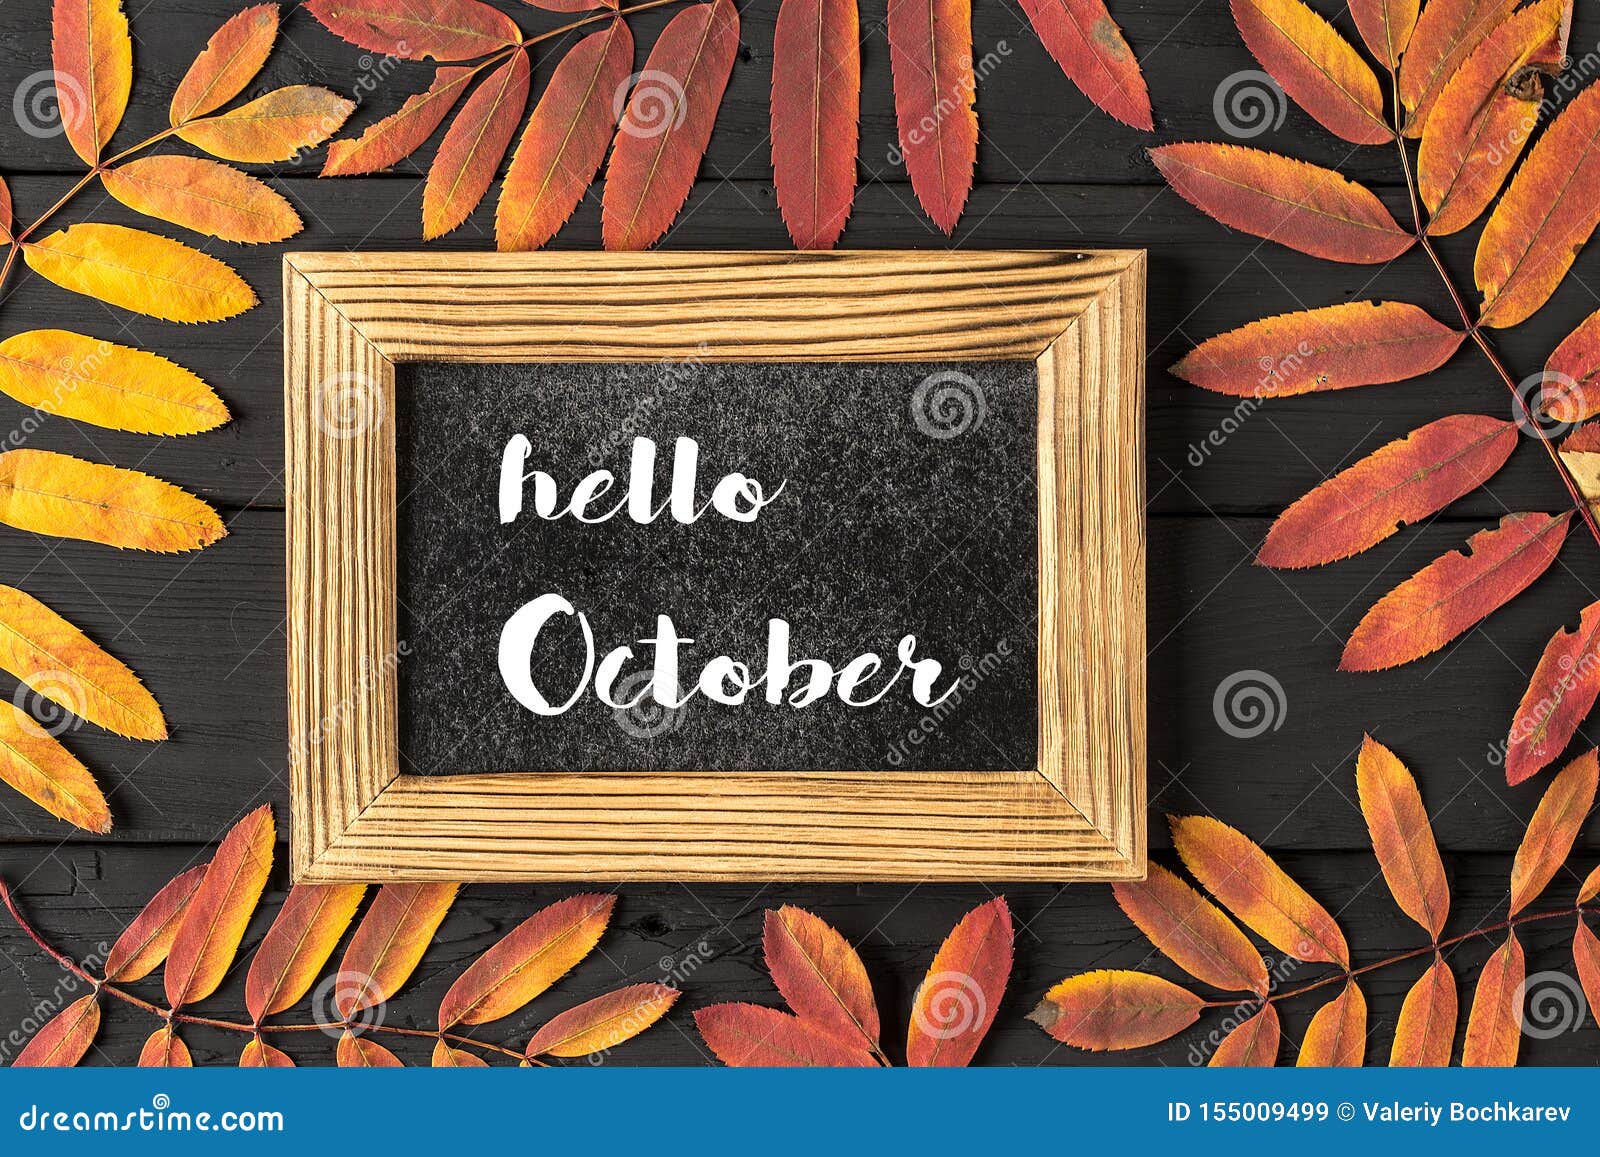 hello october lettering card. concept of the fall season